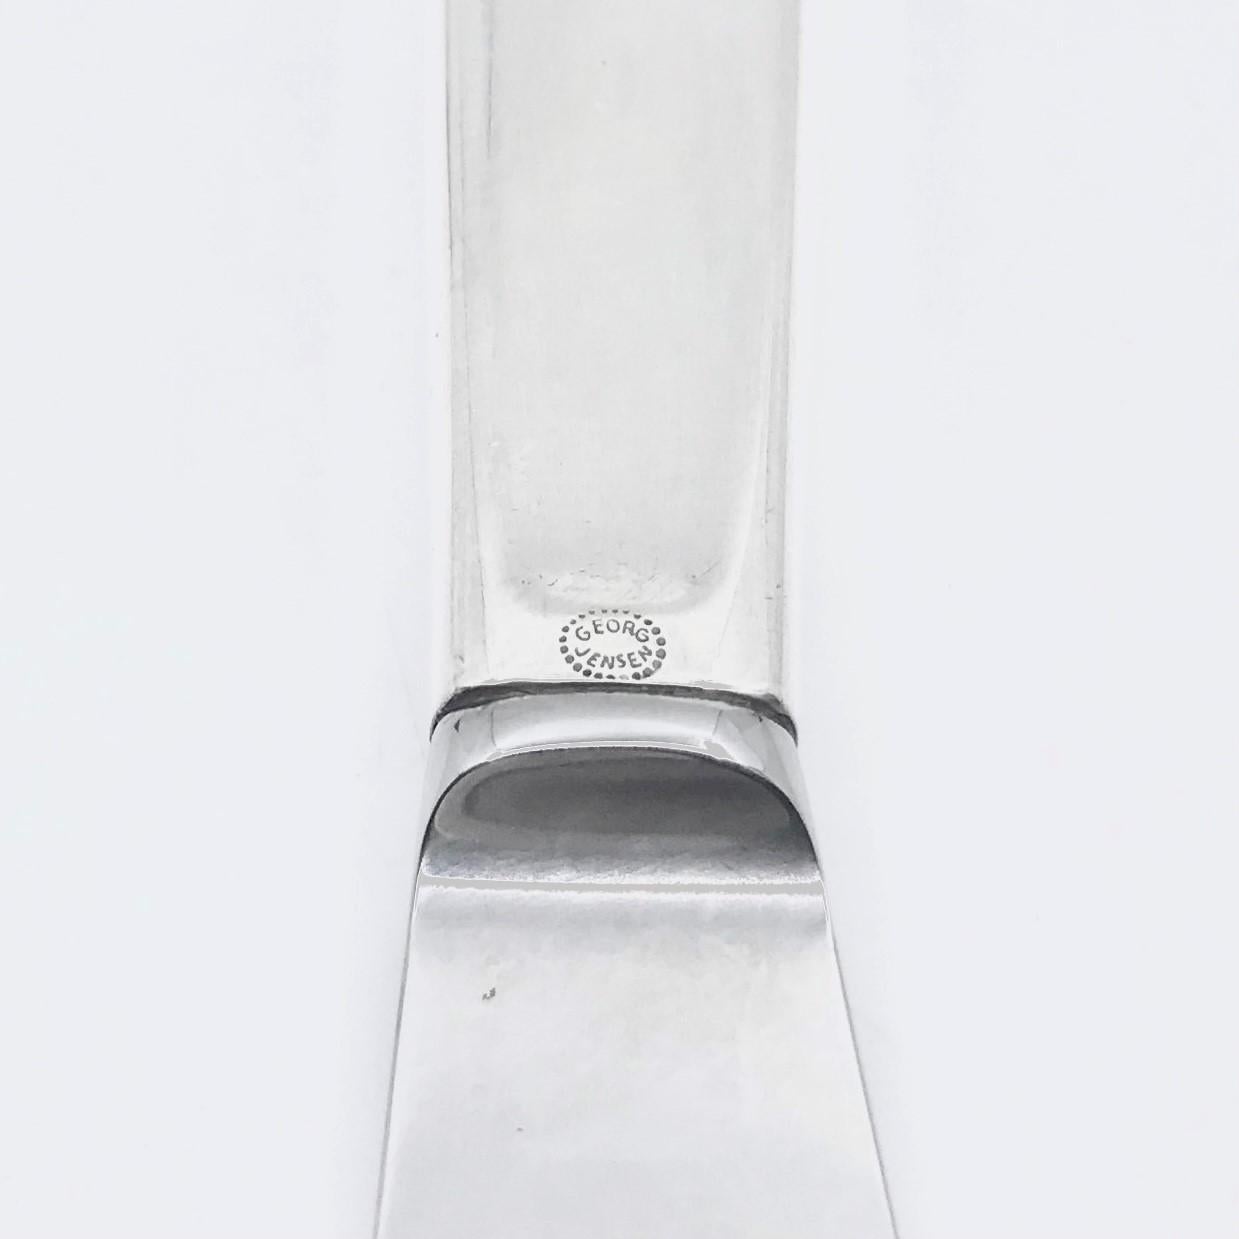 Georg Jensen child/fruit knife with sterling silver handle and stainless steel blade, item 072 in the Cypress pattern, design #99 by Tias Eckhoff. Norwegian designer Tias Eckhoff’s Cypress was the winning design in a competition to design a flatware